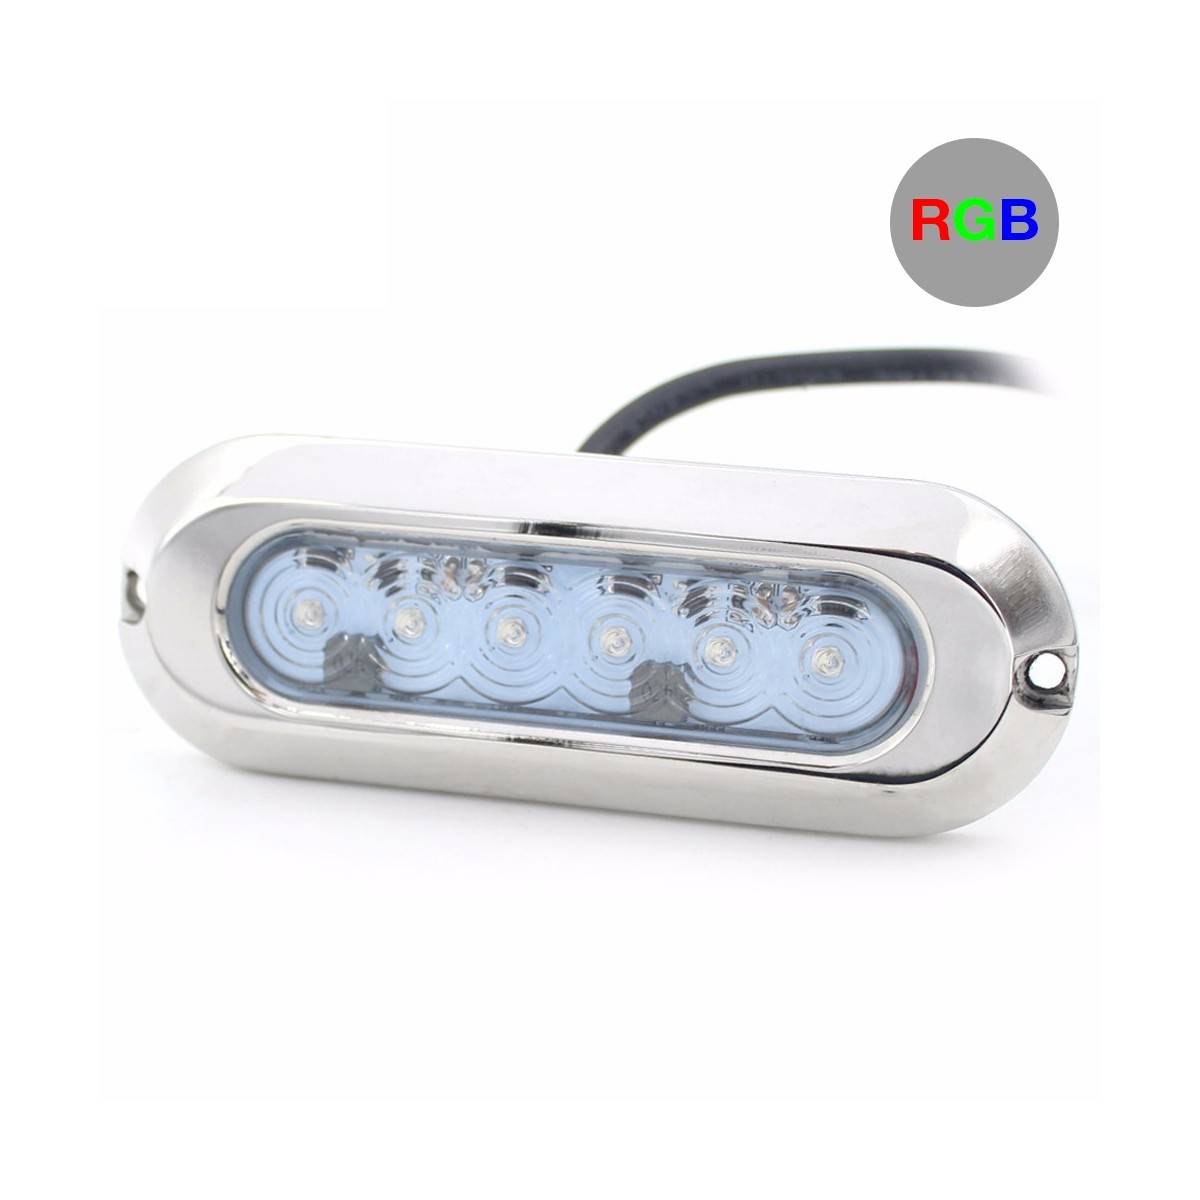 SLIM 30W 12V 316L stainless steel IP68 RGB LED submersible surface light